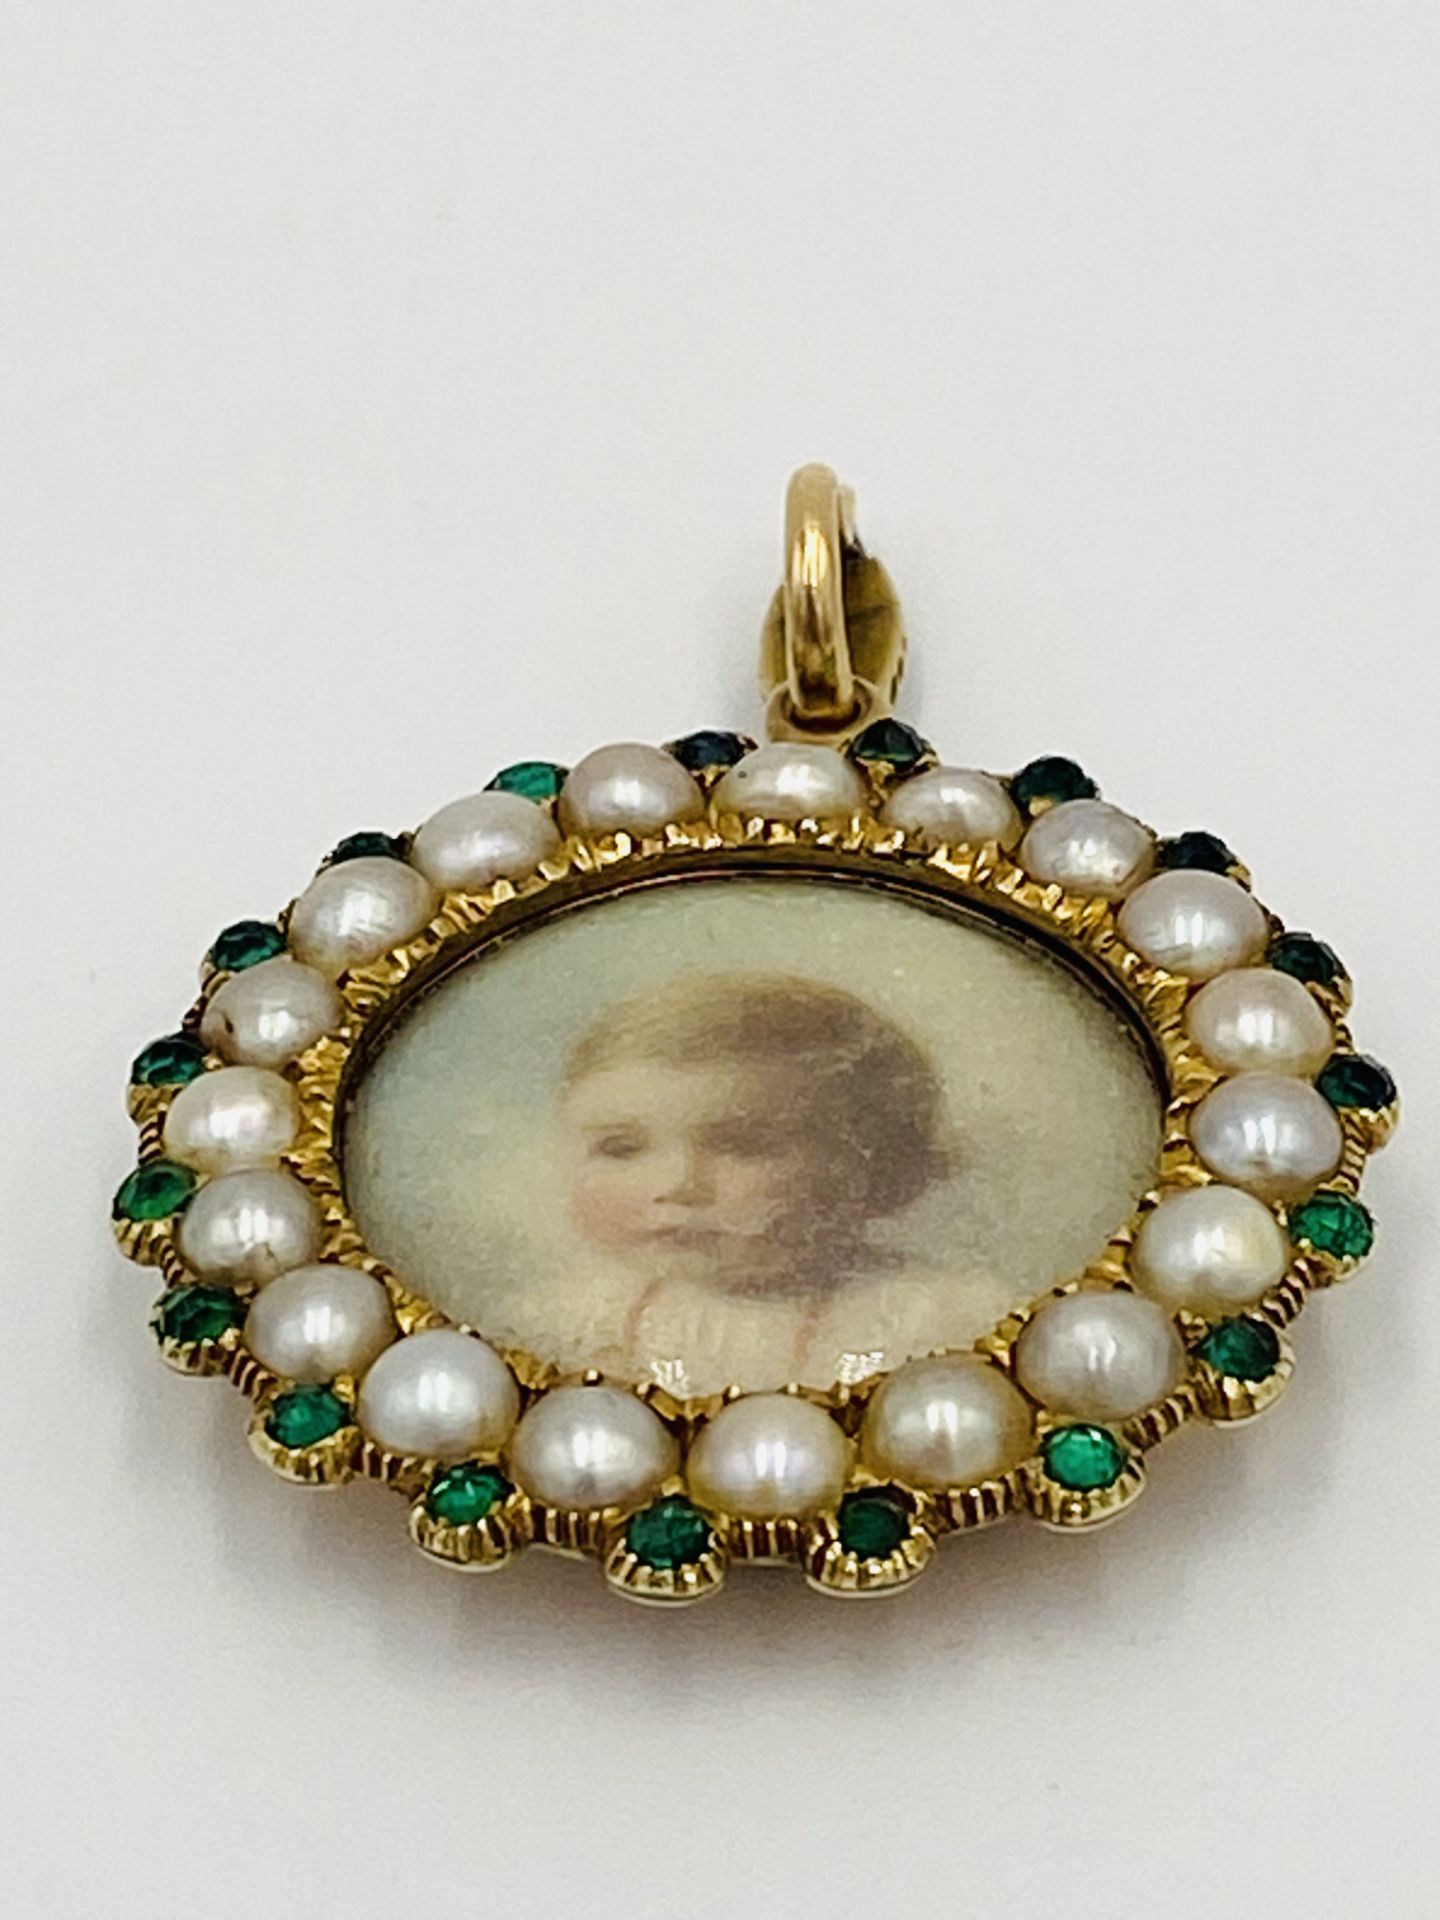 Portrait pendant with pearl and emerald surround - Image 2 of 4